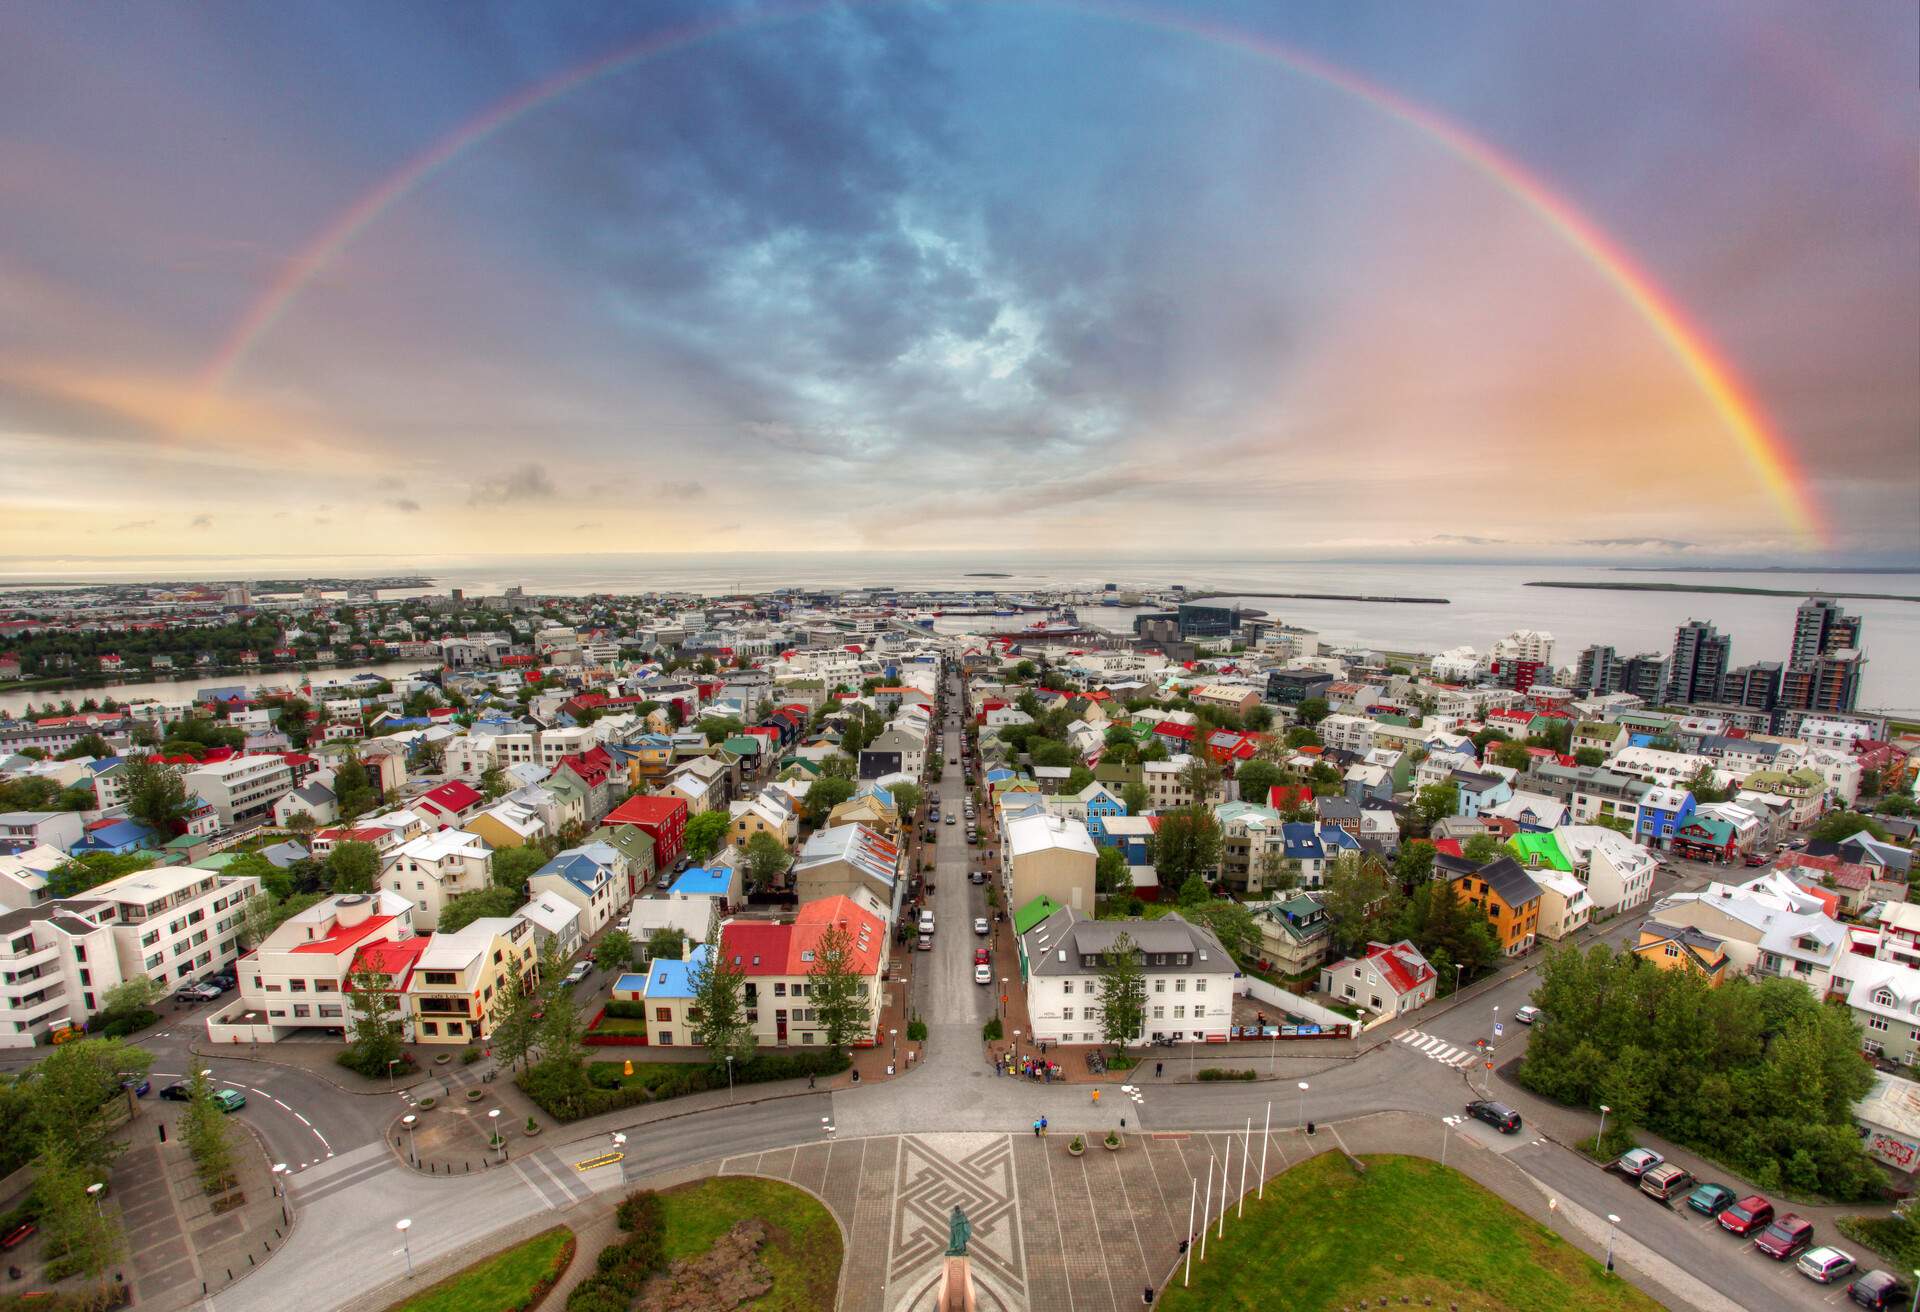 A road cuts across a residential neighbourhood in a city with a rainbow in the sky.